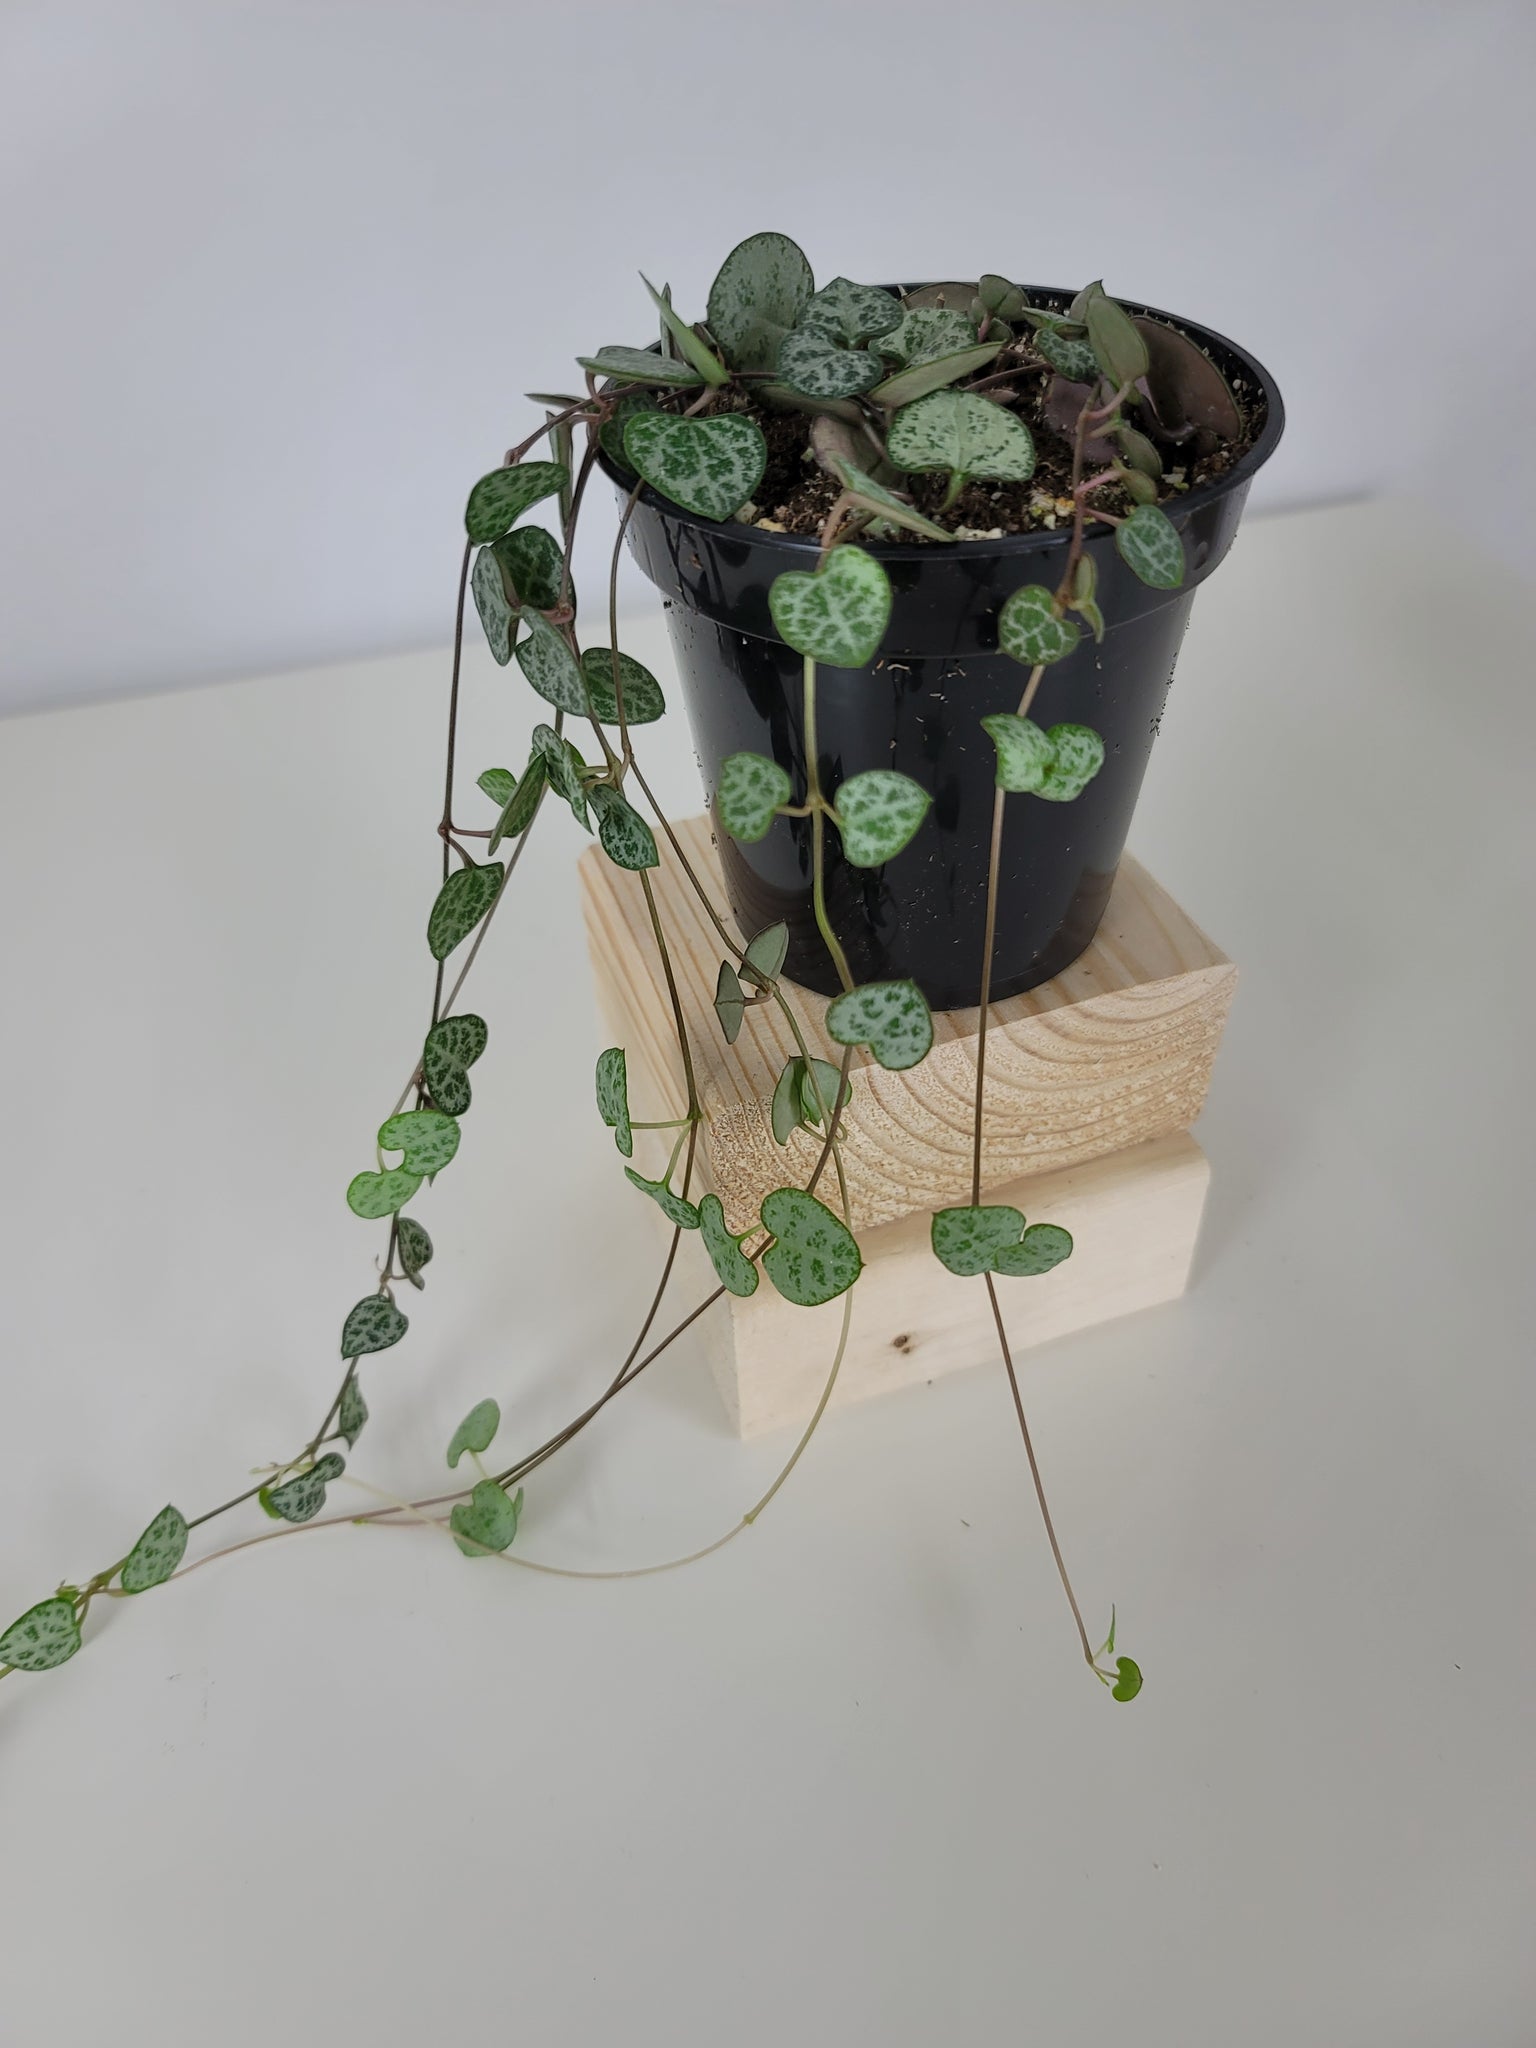 Ceropegia Woodii - String of Hearts